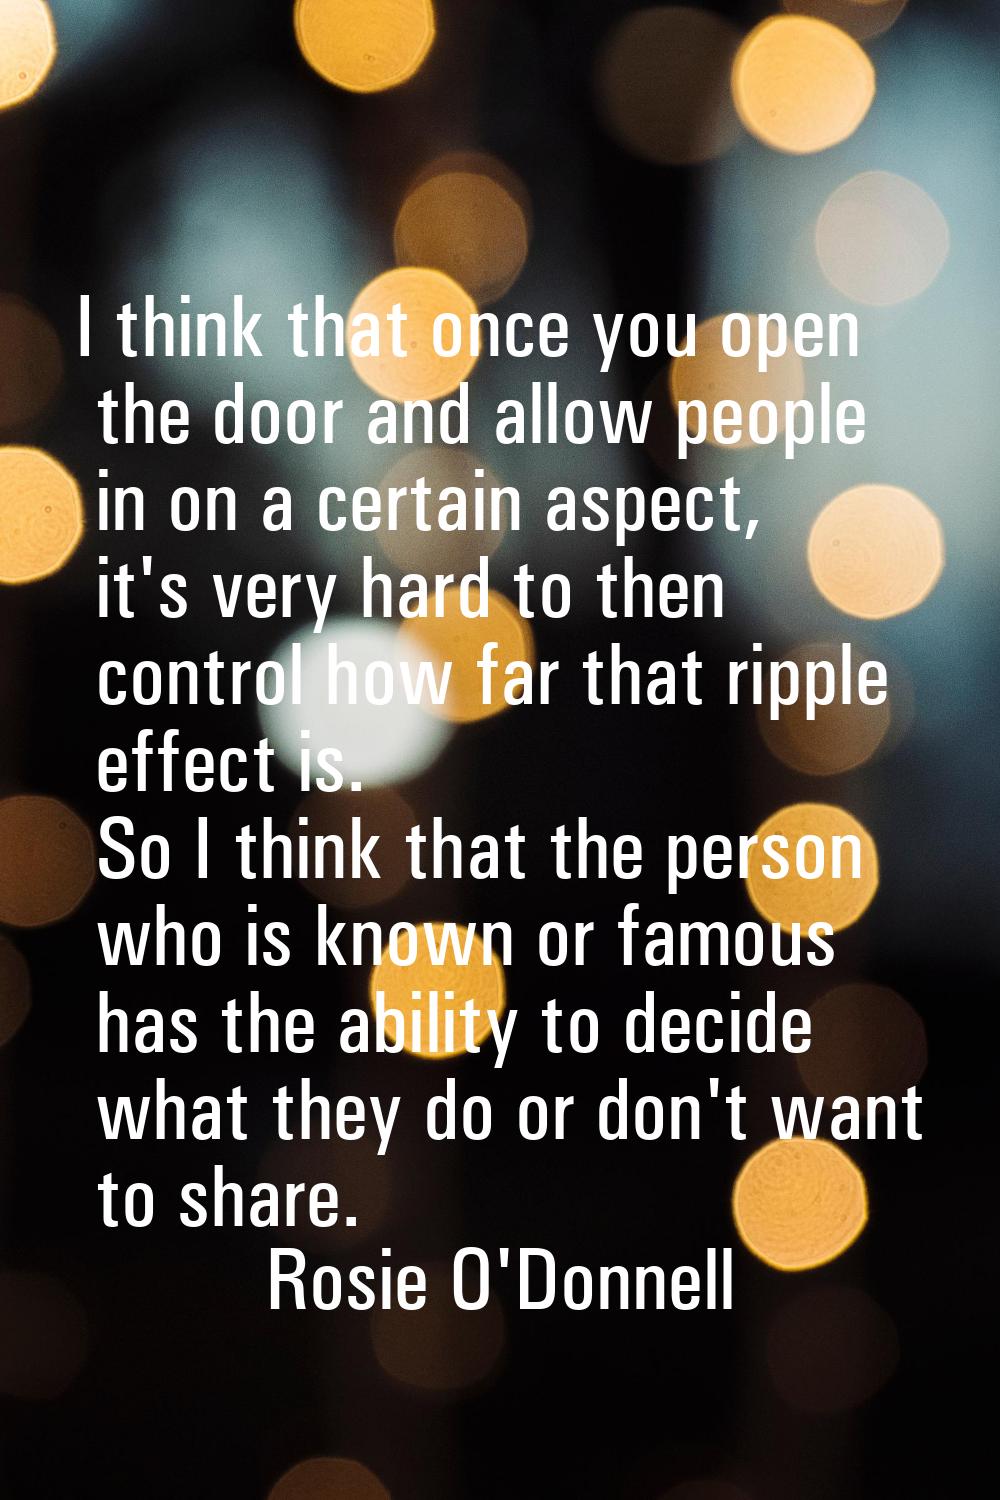 I think that once you open the door and allow people in on a certain aspect, it's very hard to then